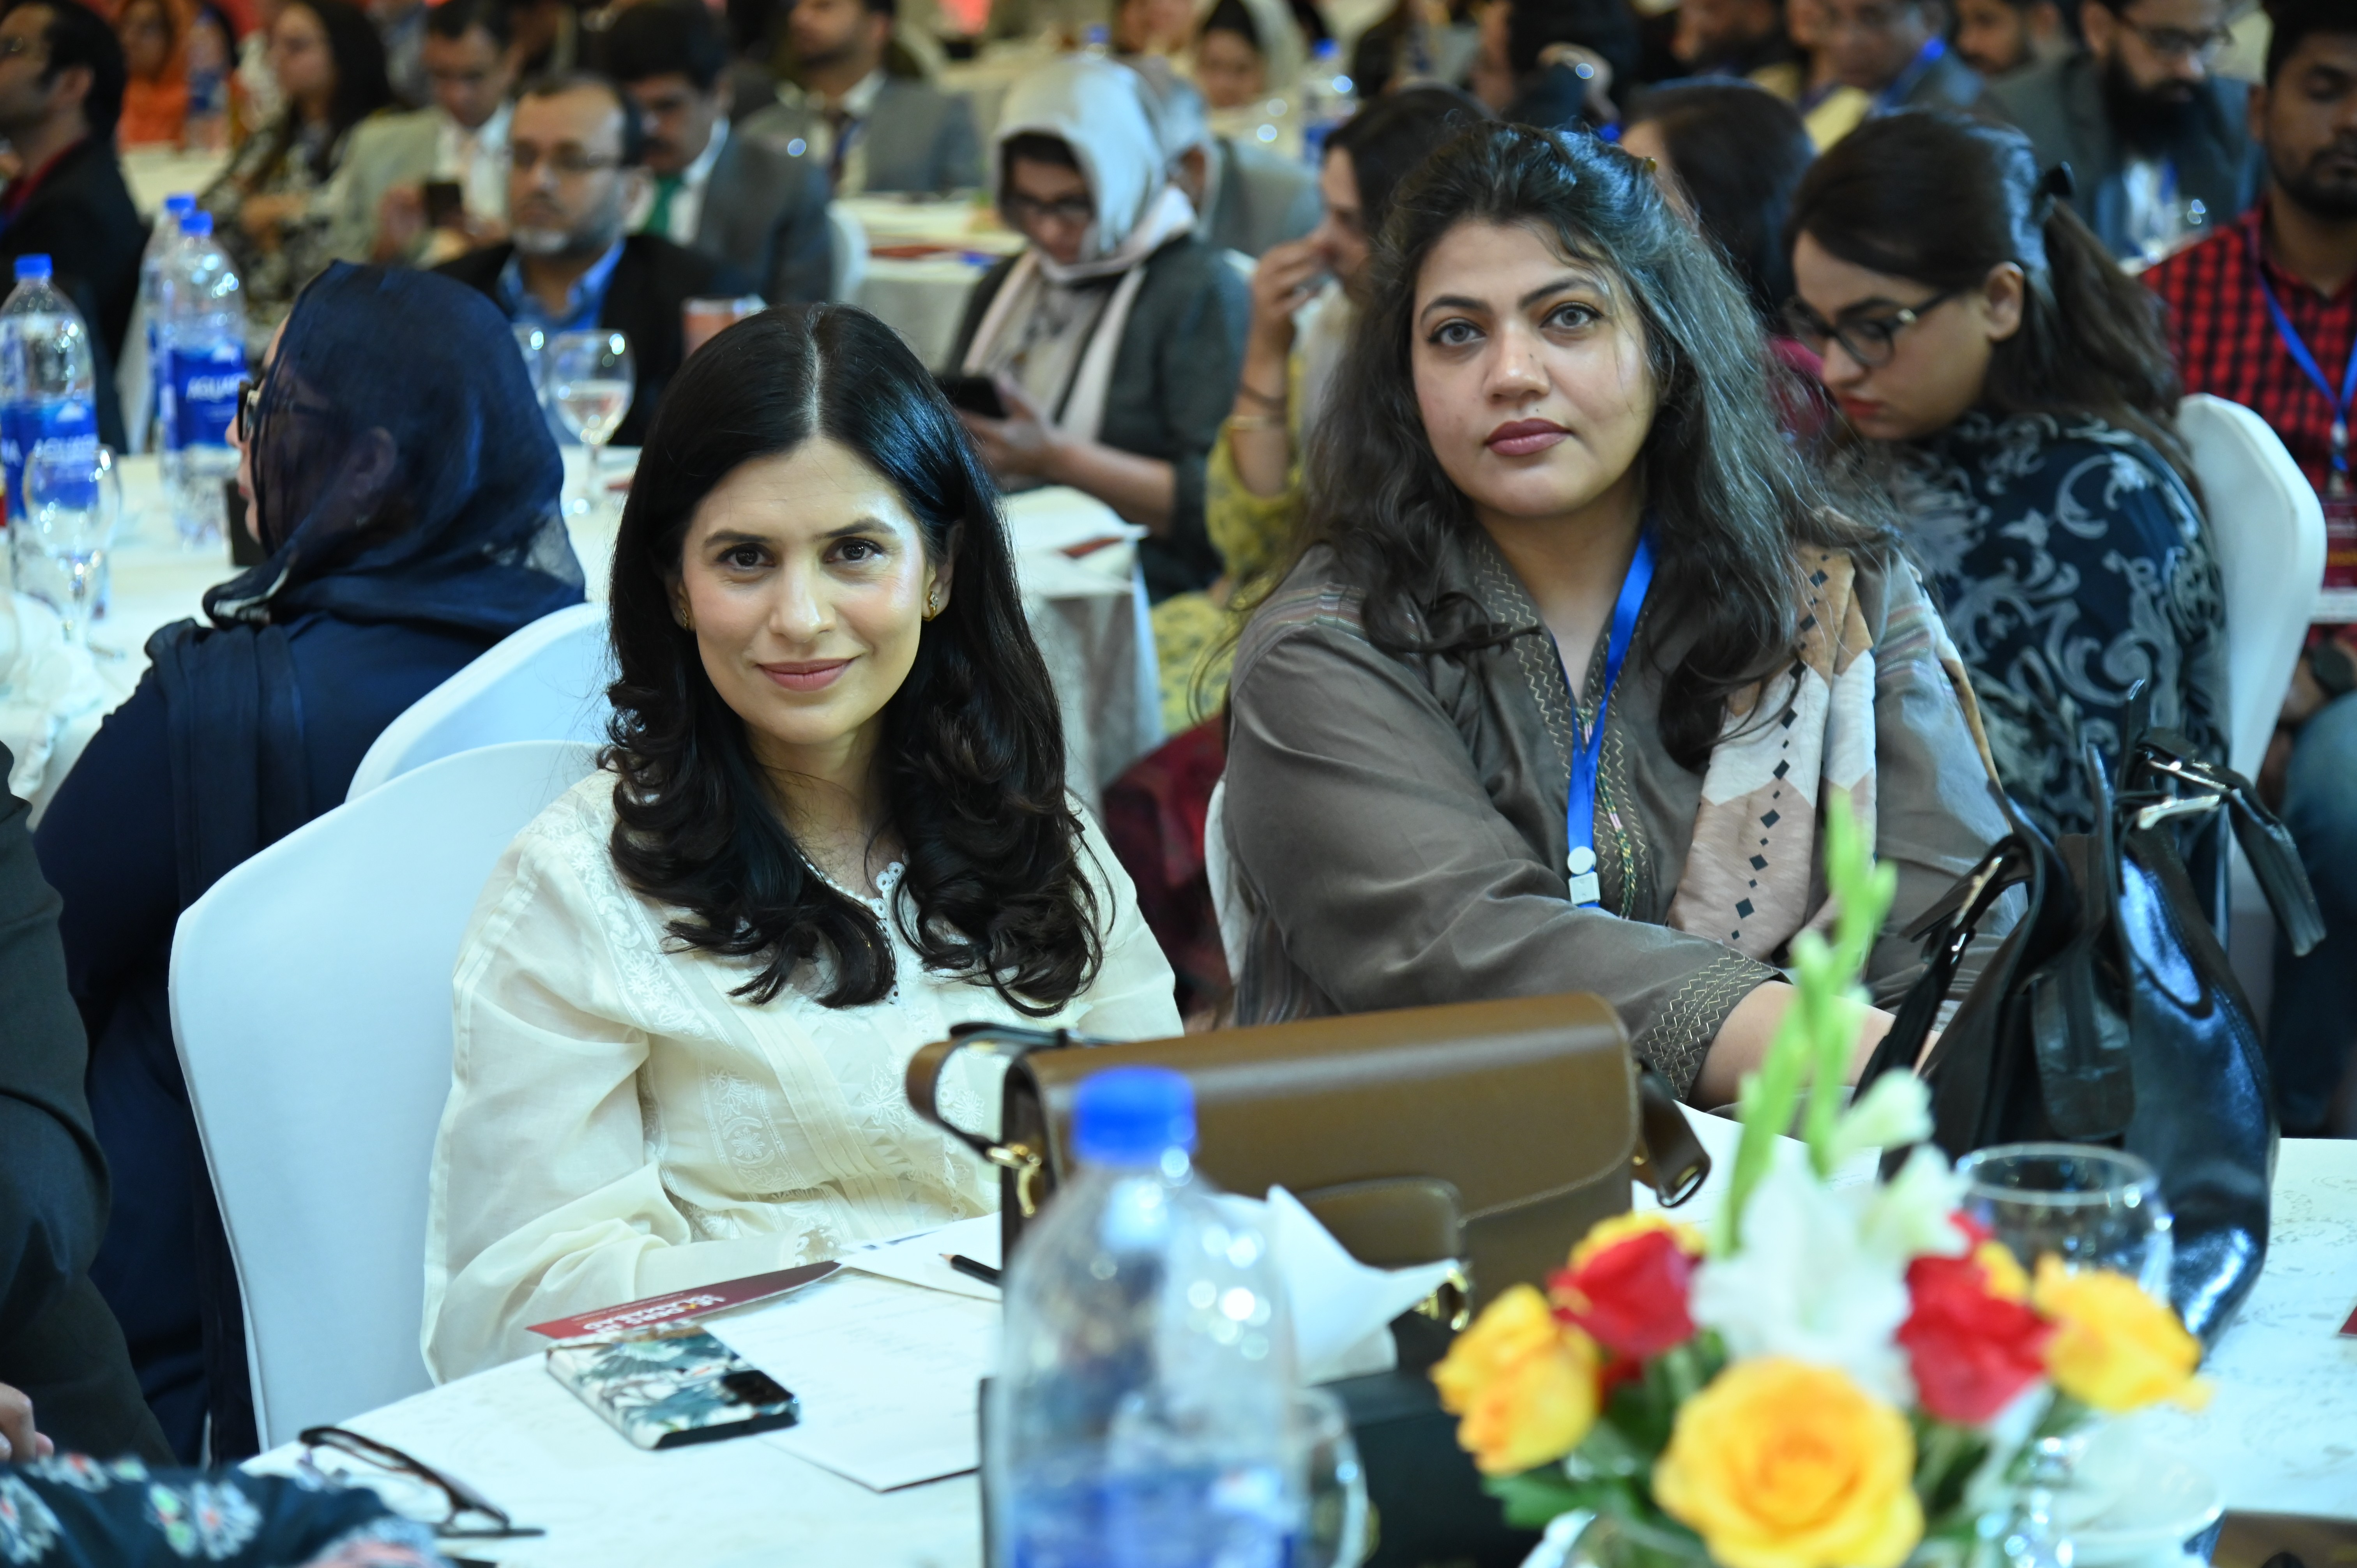 The participants at the Business Summit 2024 named Leaders in Islamabad